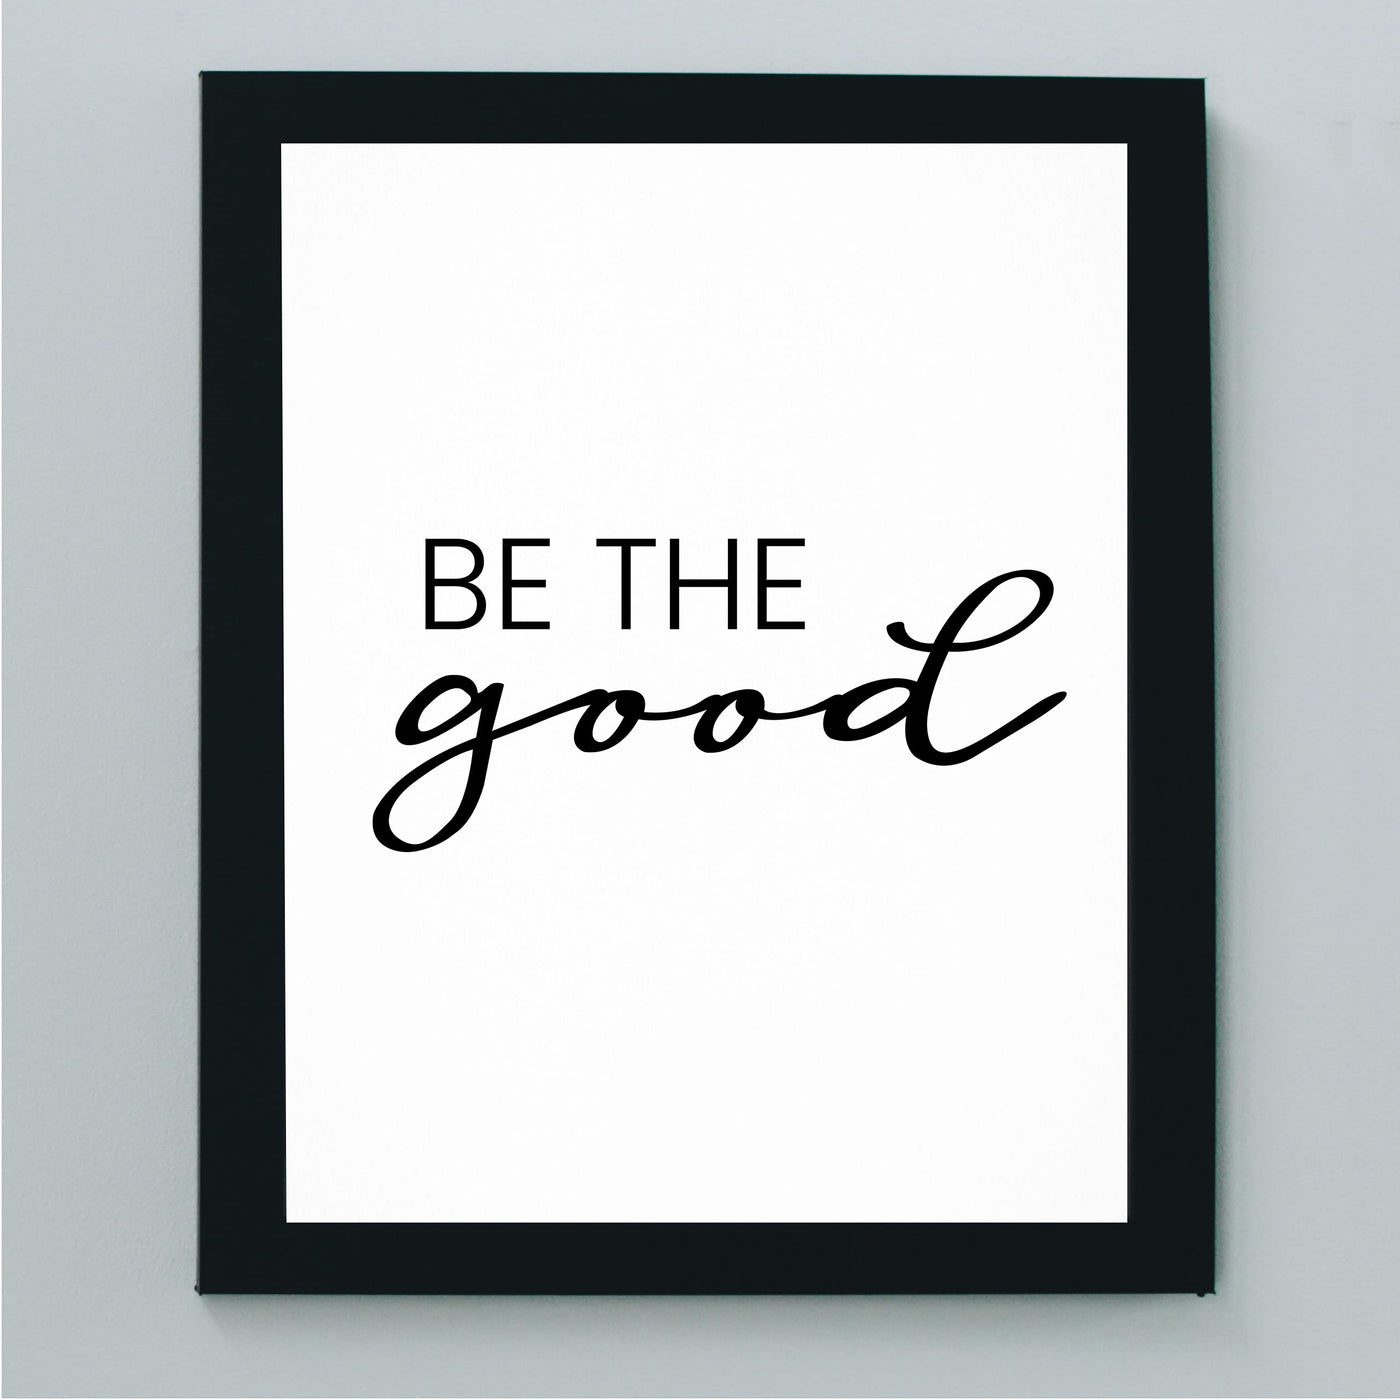 Be the Good Inspirational Quotes Wall Sign -8 x 10" Farmhouse Wall Art Print-Ready to Frame. Modern Typographic Design. Motivational Home-Office-Desk-School Decor. Great Gift for Inspiration!